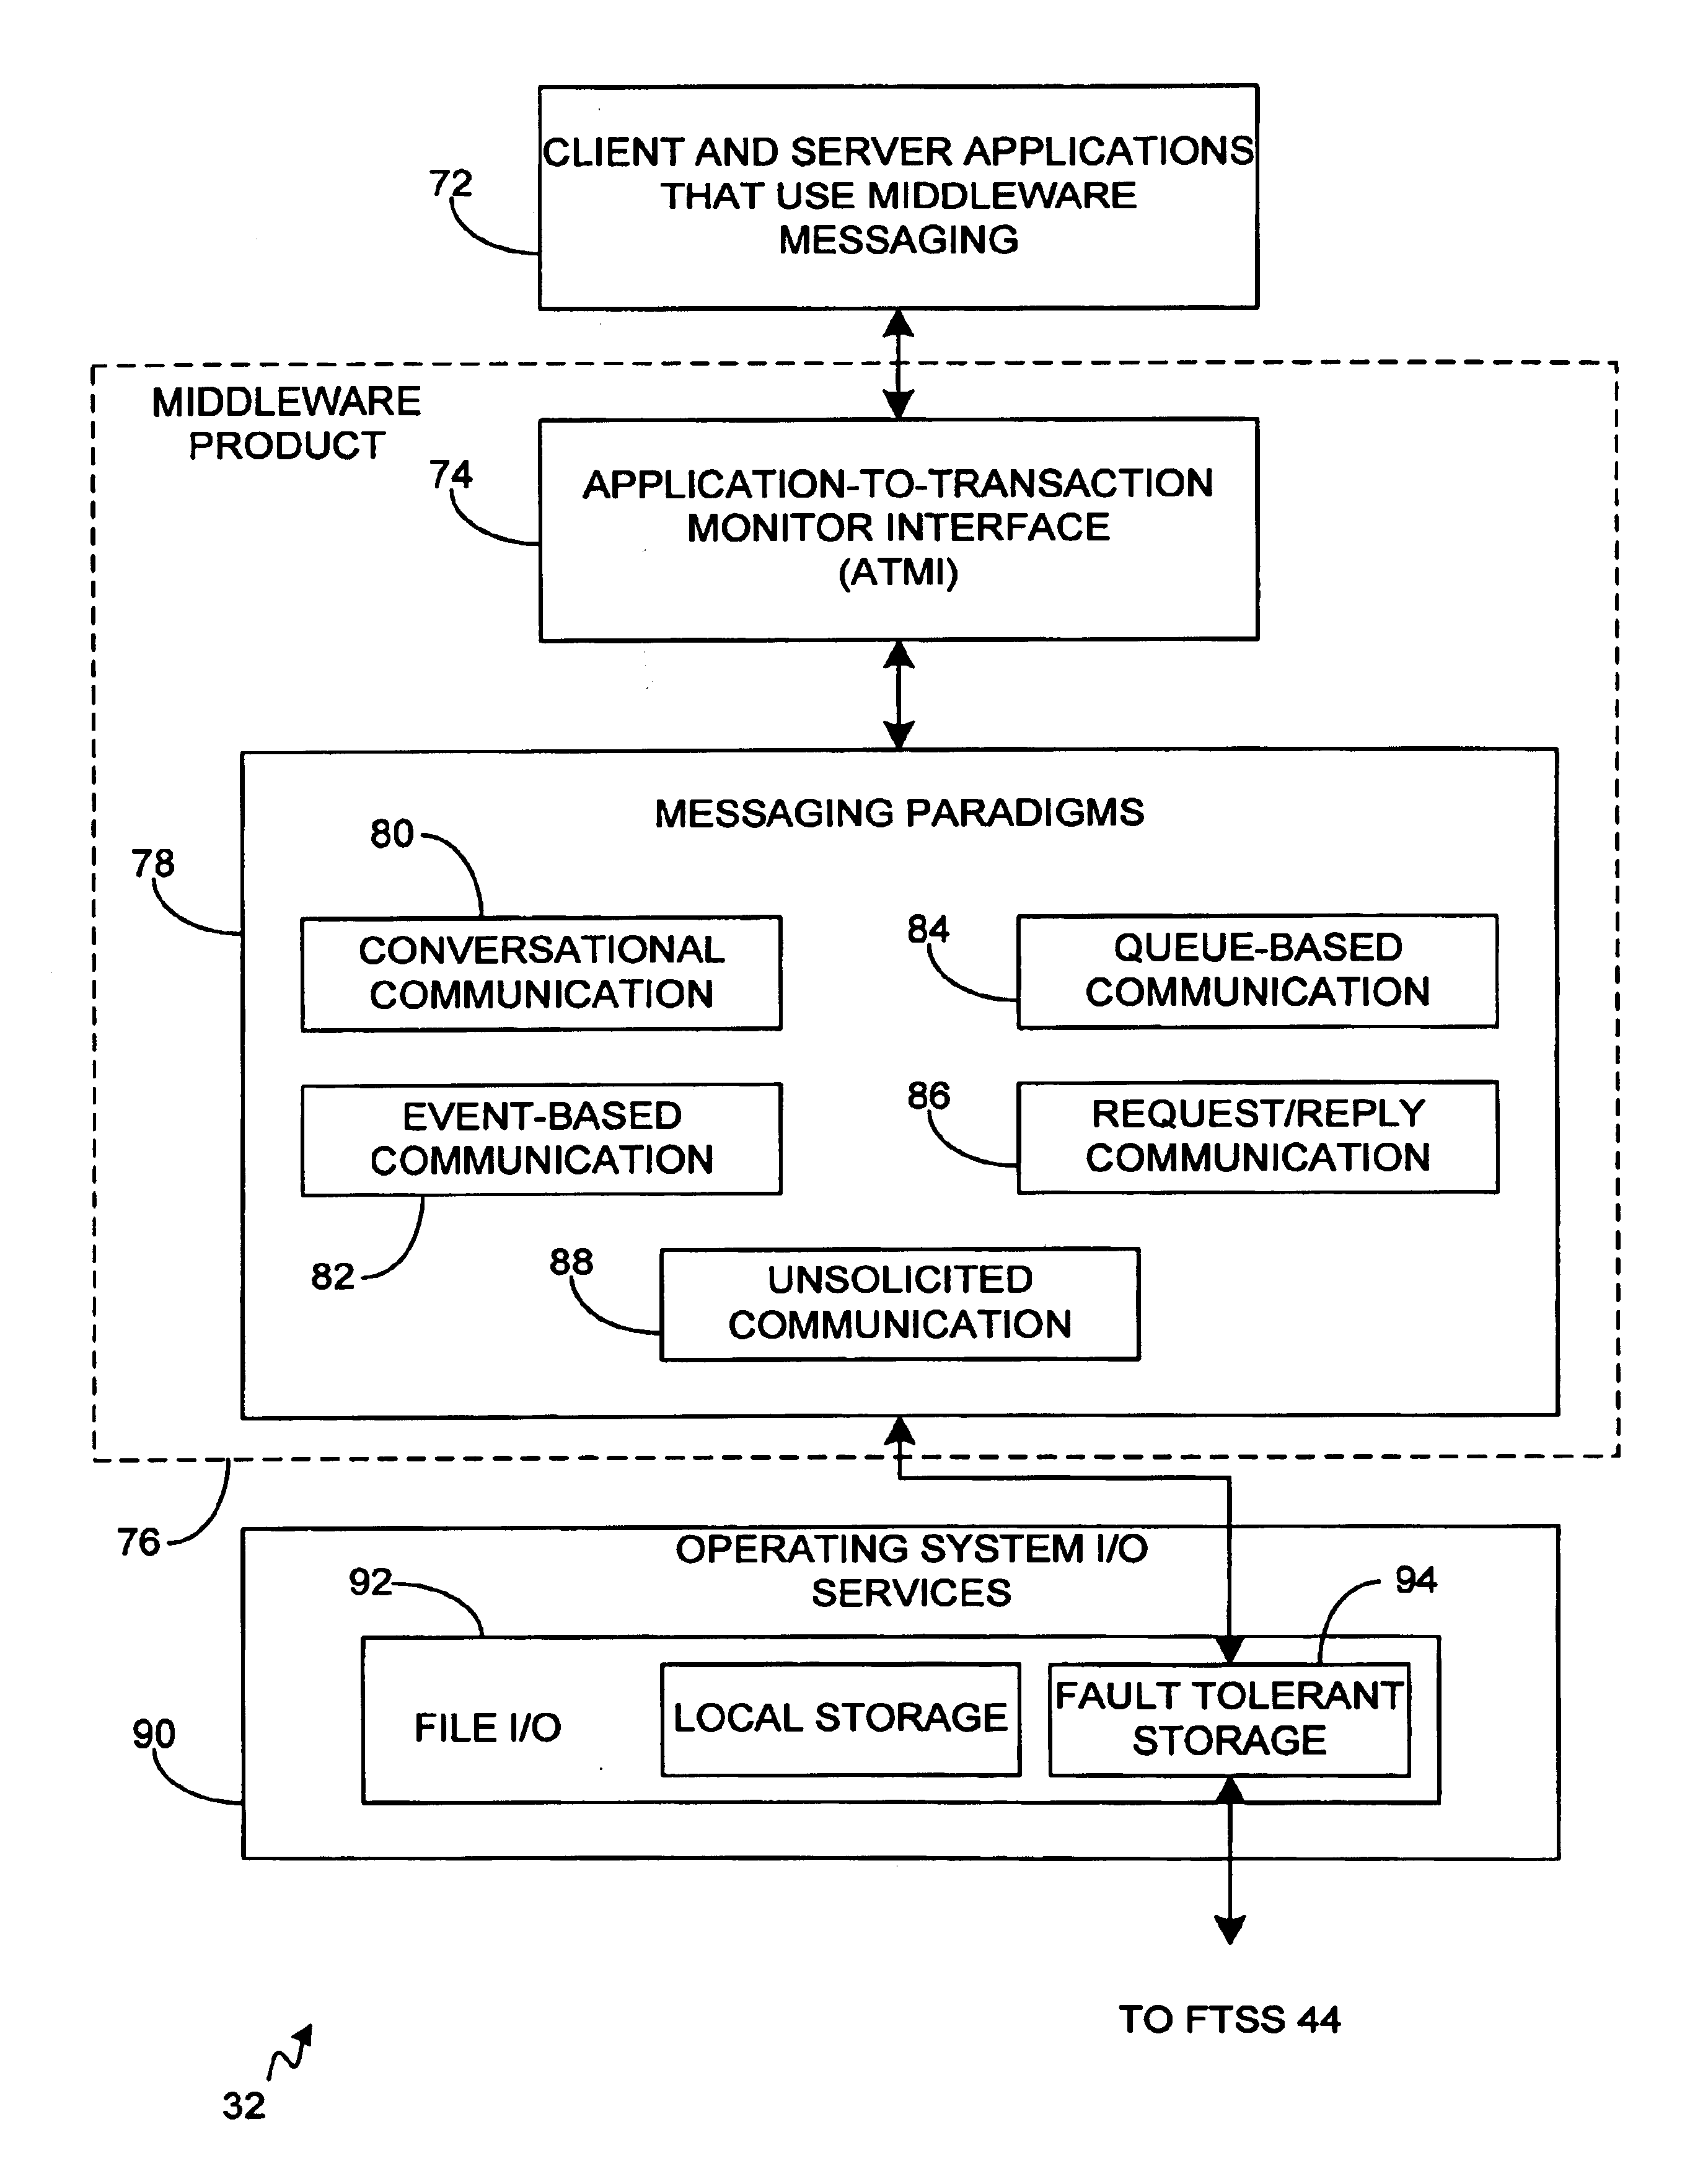 Method and apparatus for passing messages using a fault tolerant storage system